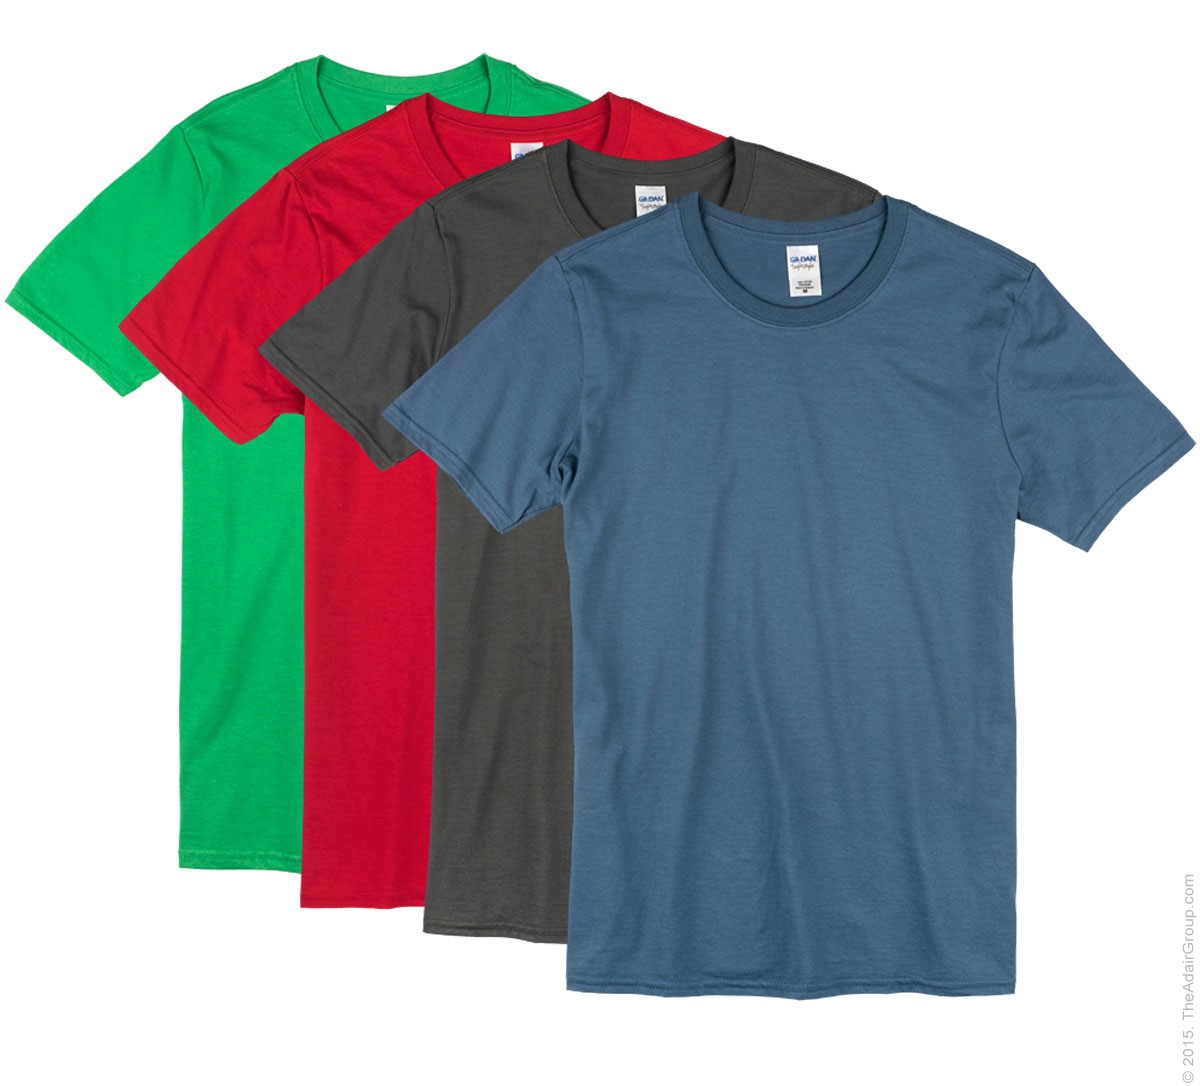 Blank T-Shirts for Adults - Cheapest Prices & Quality Selection ...